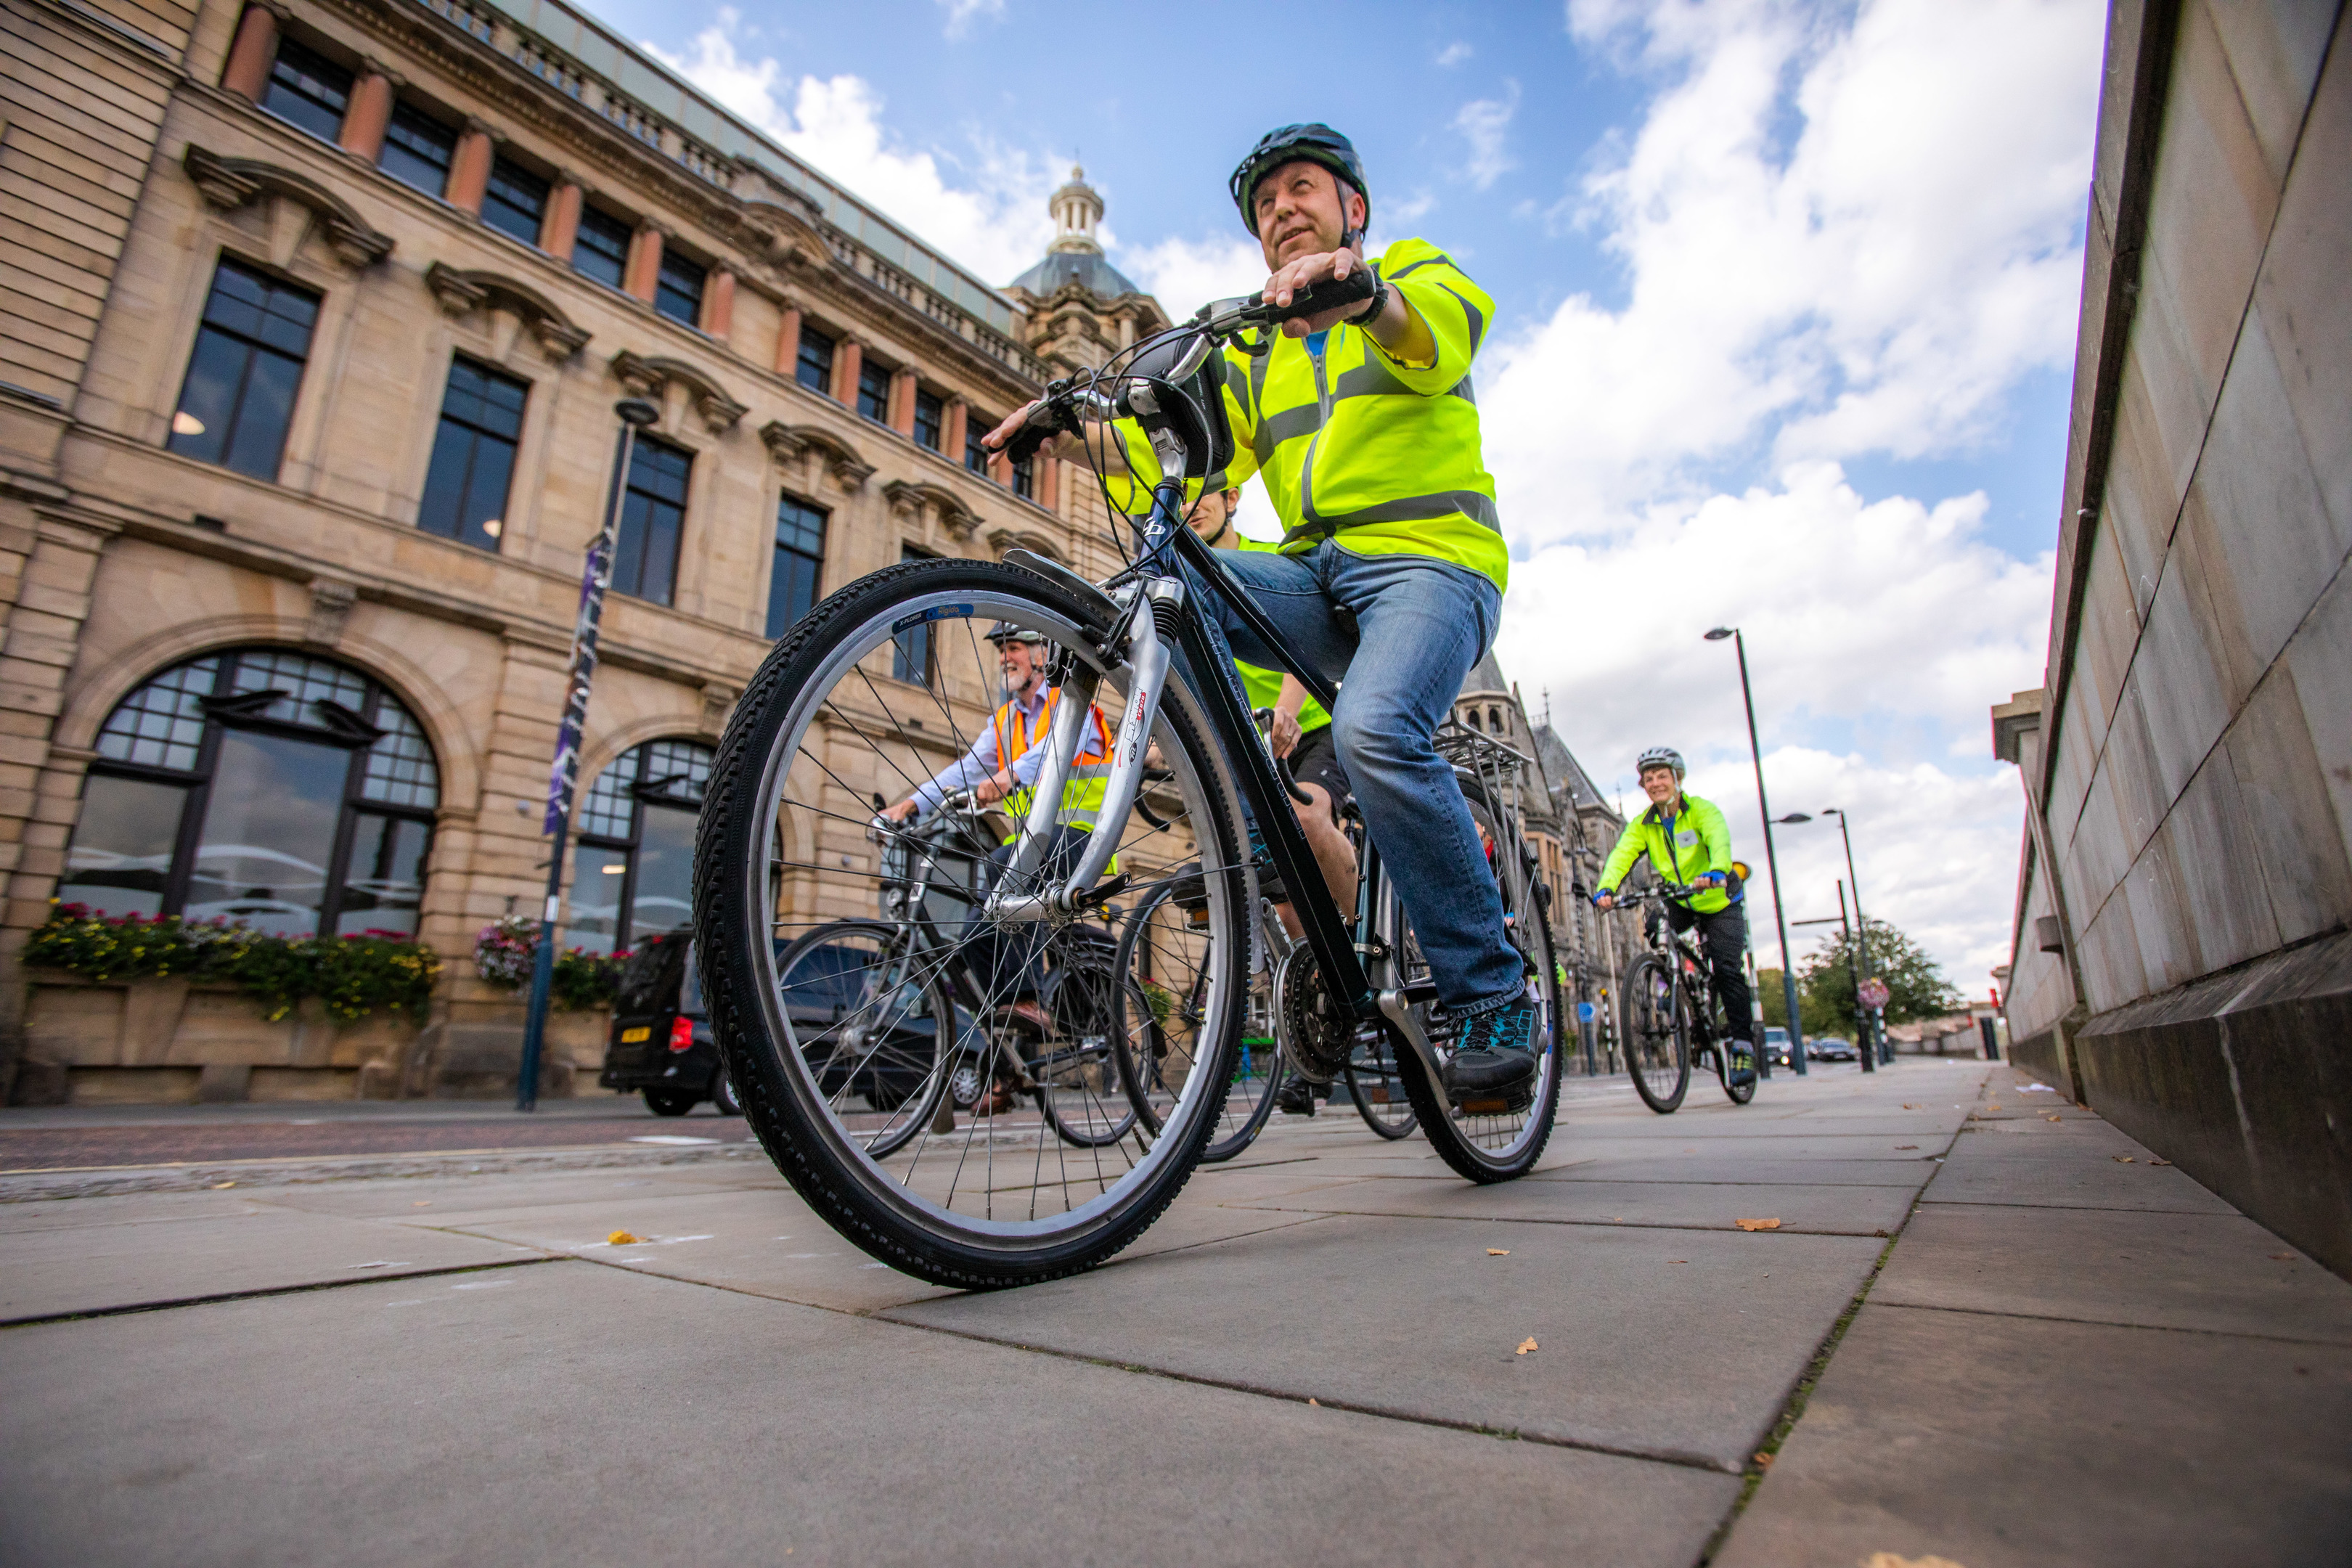 Councillors took to the saddle for a first-person look at cycling in Perth.